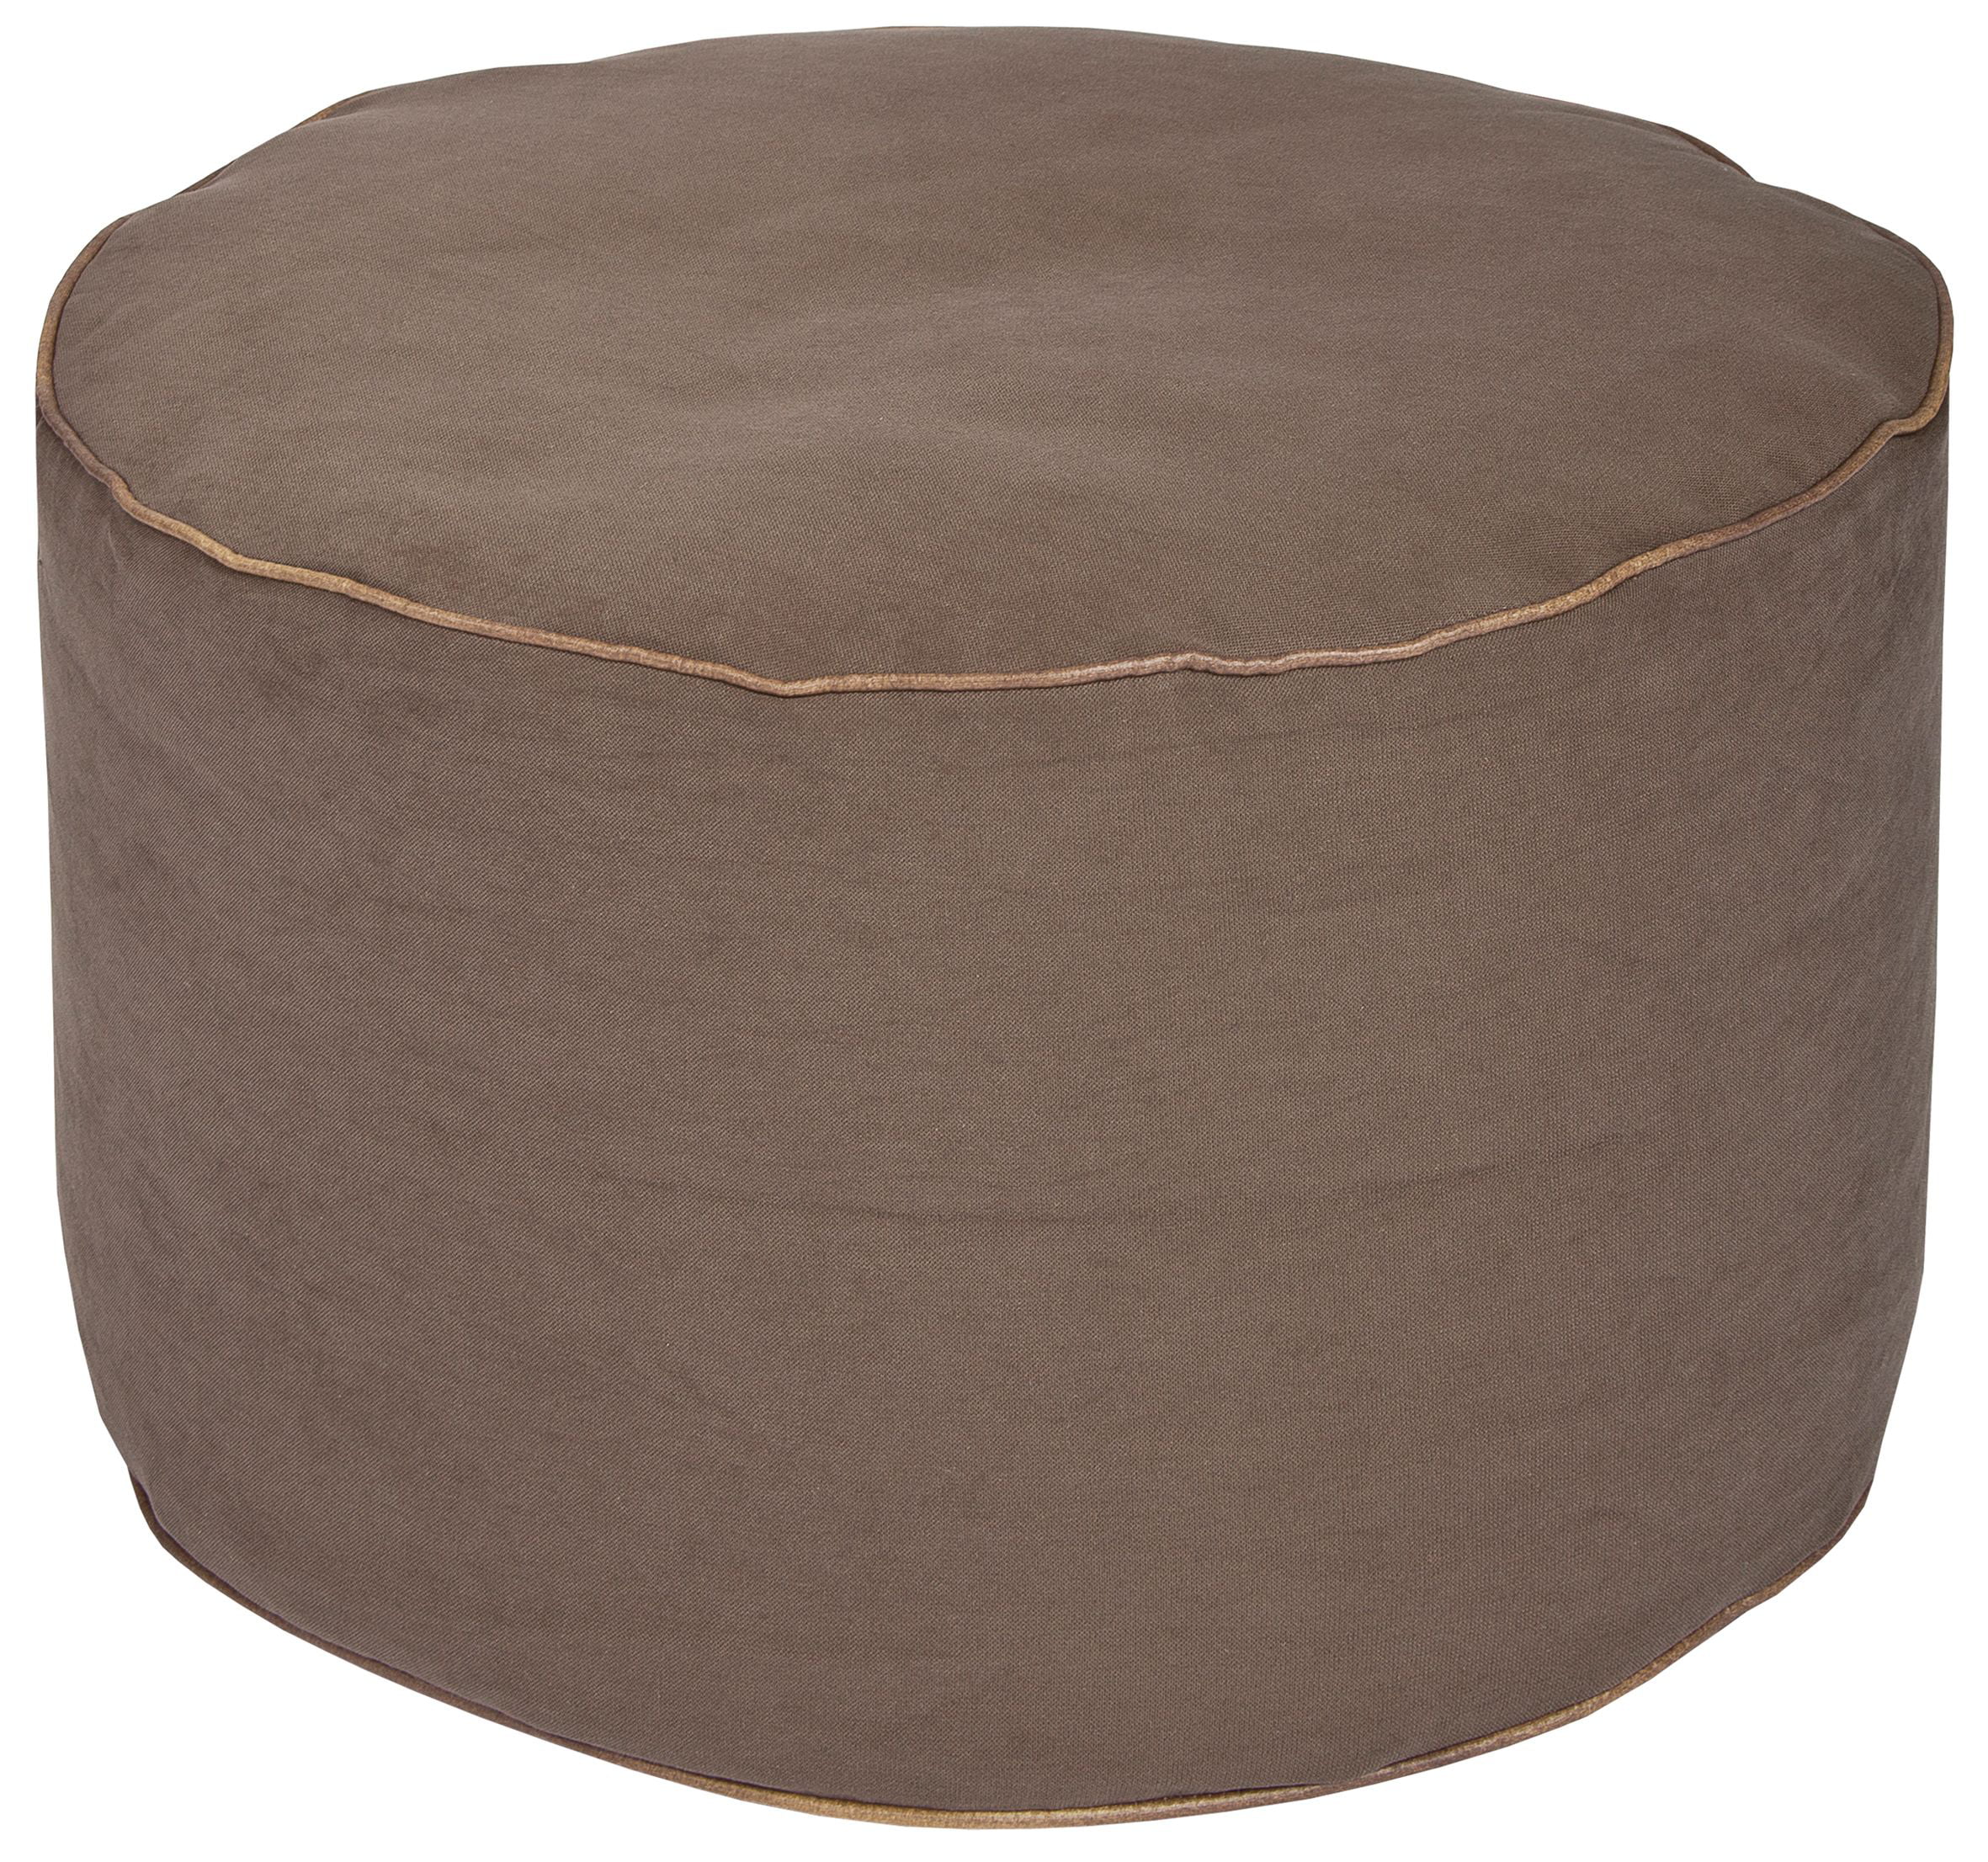 Turquoise Gouchee Home Dotcom Pouf Collection Contemporary Polyester Upholstered Round Pouf/Ottoman